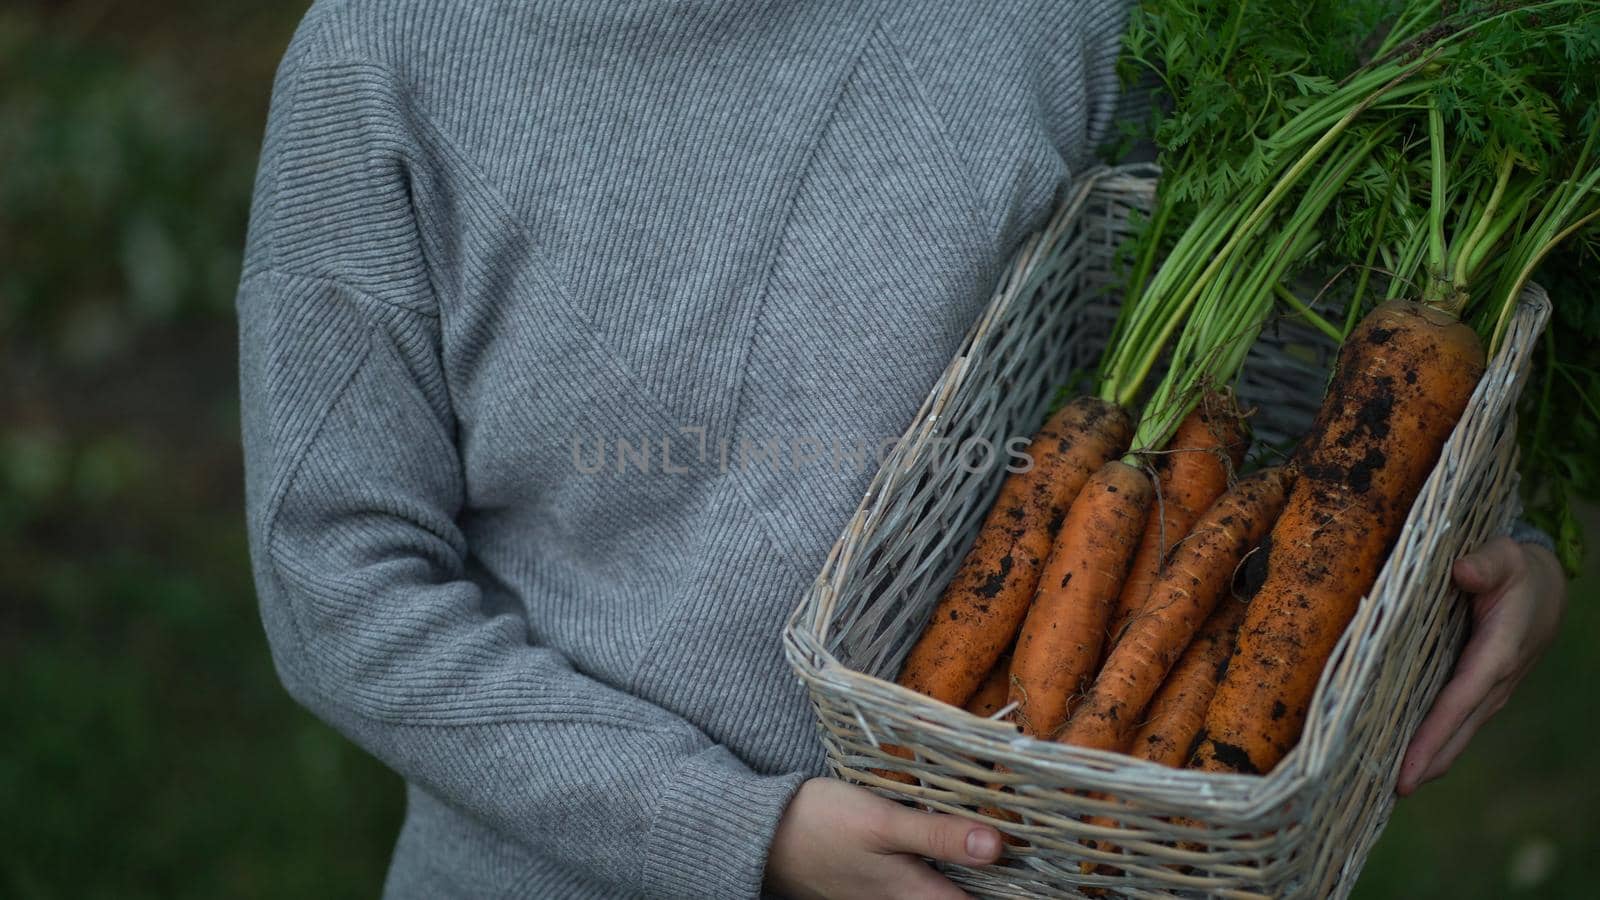 Woman farmer in a gray turtleneck carries a ripe young carrot in a straw basket close-up.